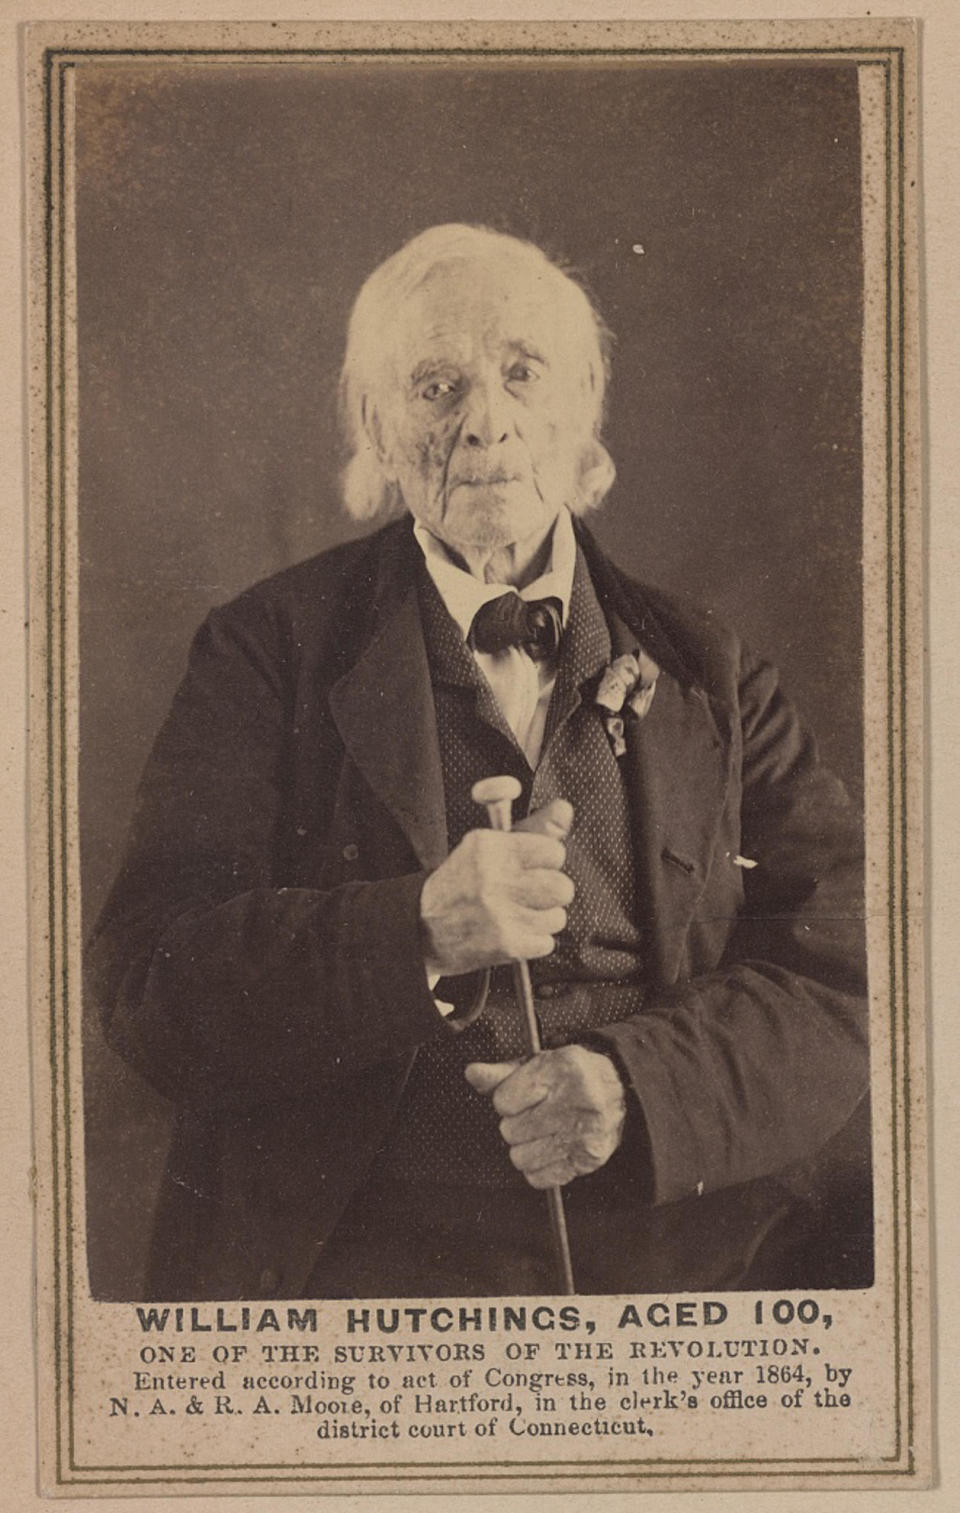 He's 100 in the portrait and looks very old, with some white, longish hair and wearing a suit, vest, and bow tie, with caption "William Hutchings, aged 100, one of the survivors of the revolution; entered according to act of Congress in the year 1864"